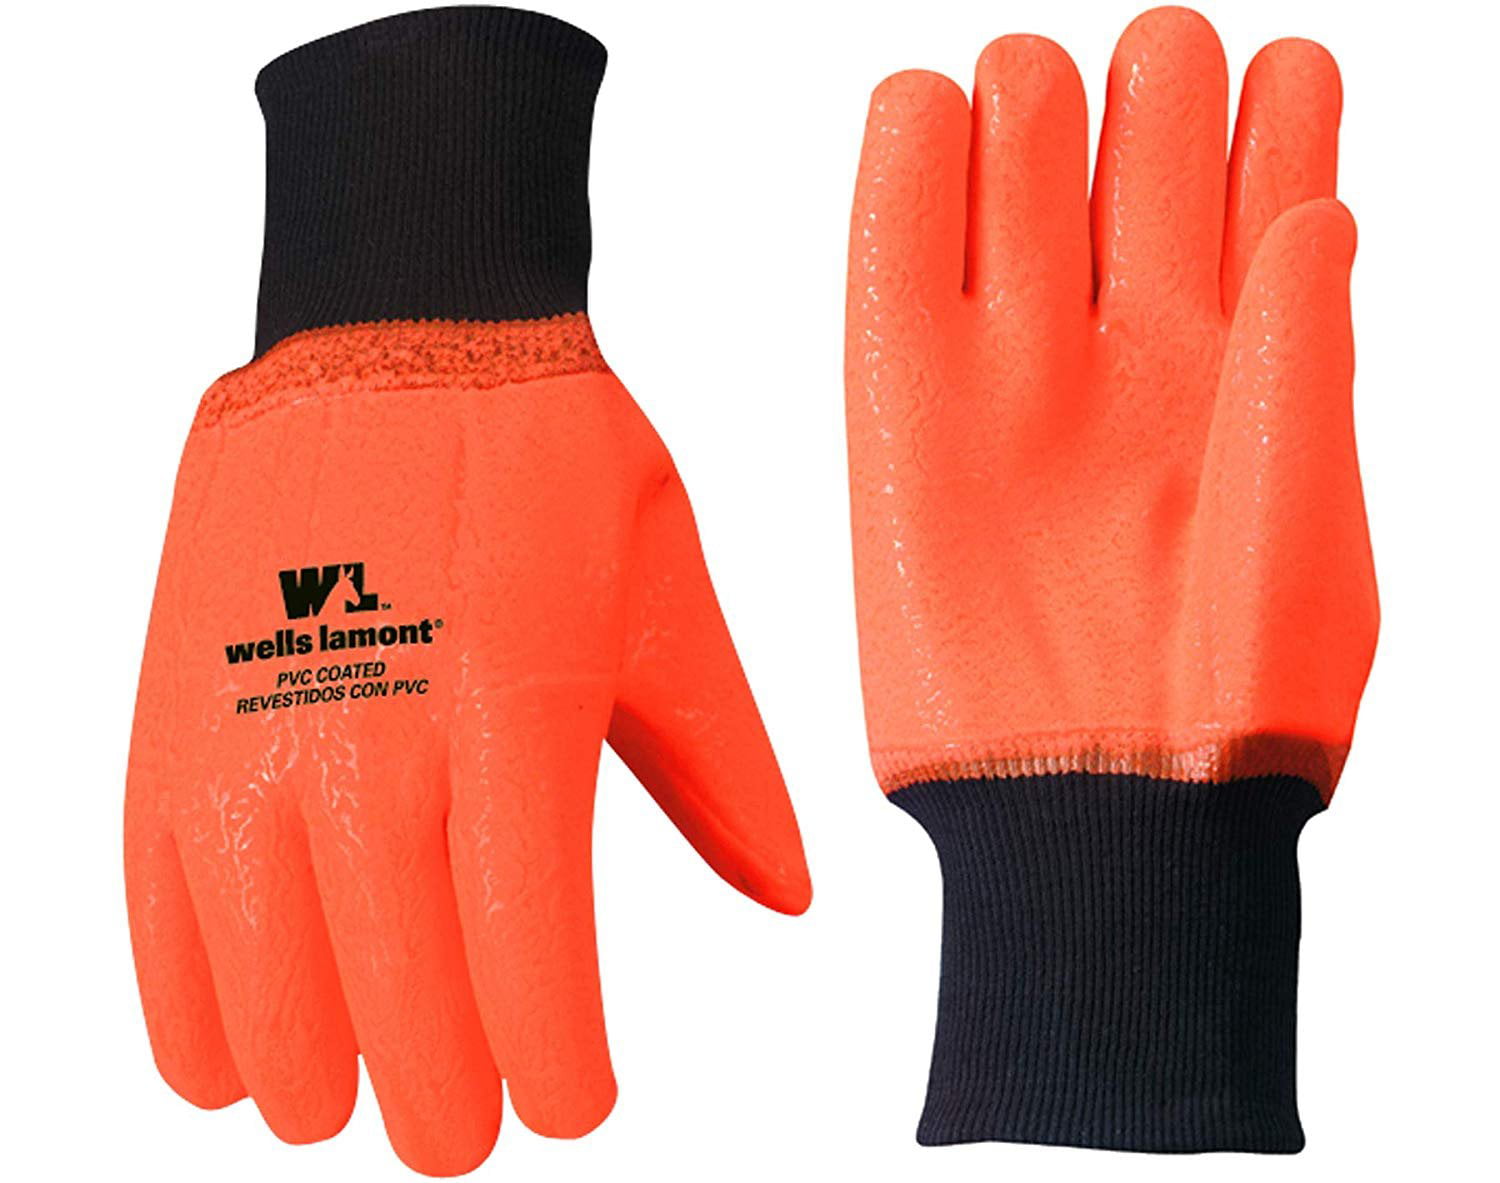 Heavy Duty Lined Safety Gloves Padded Protection Oil Water Resistant Insulated